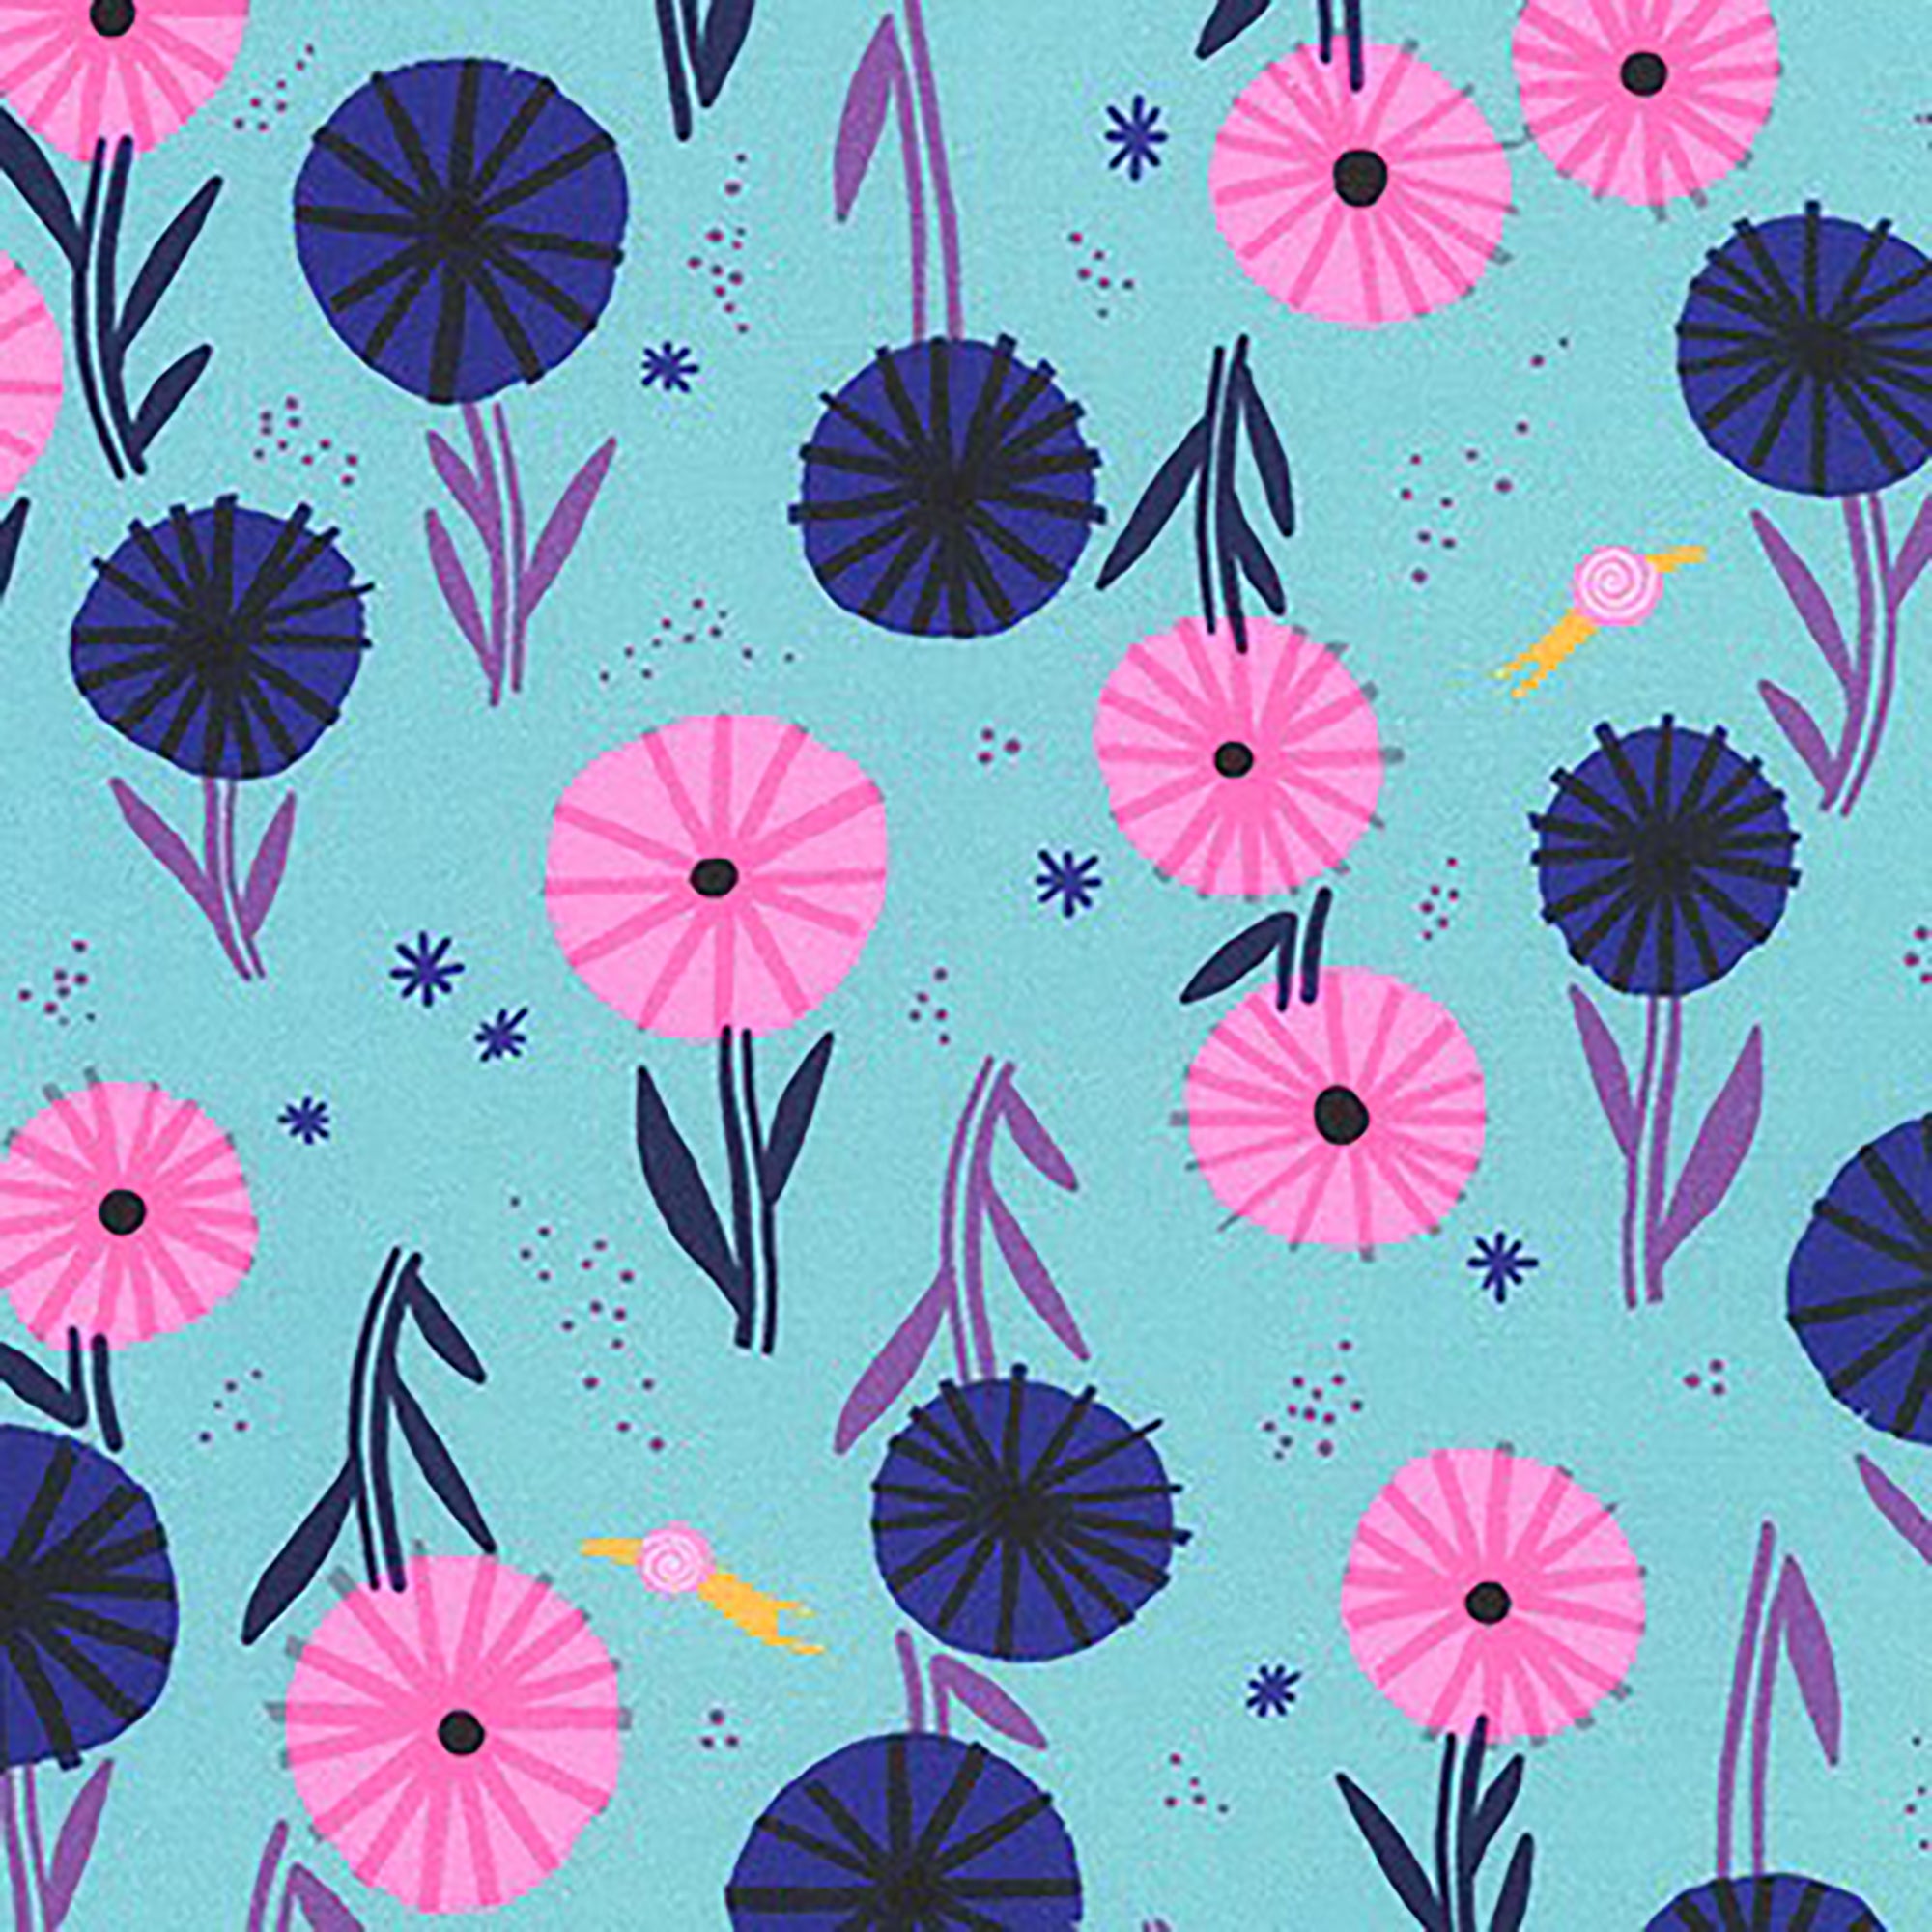 Escargot For It! - Pond Flowers Fabric